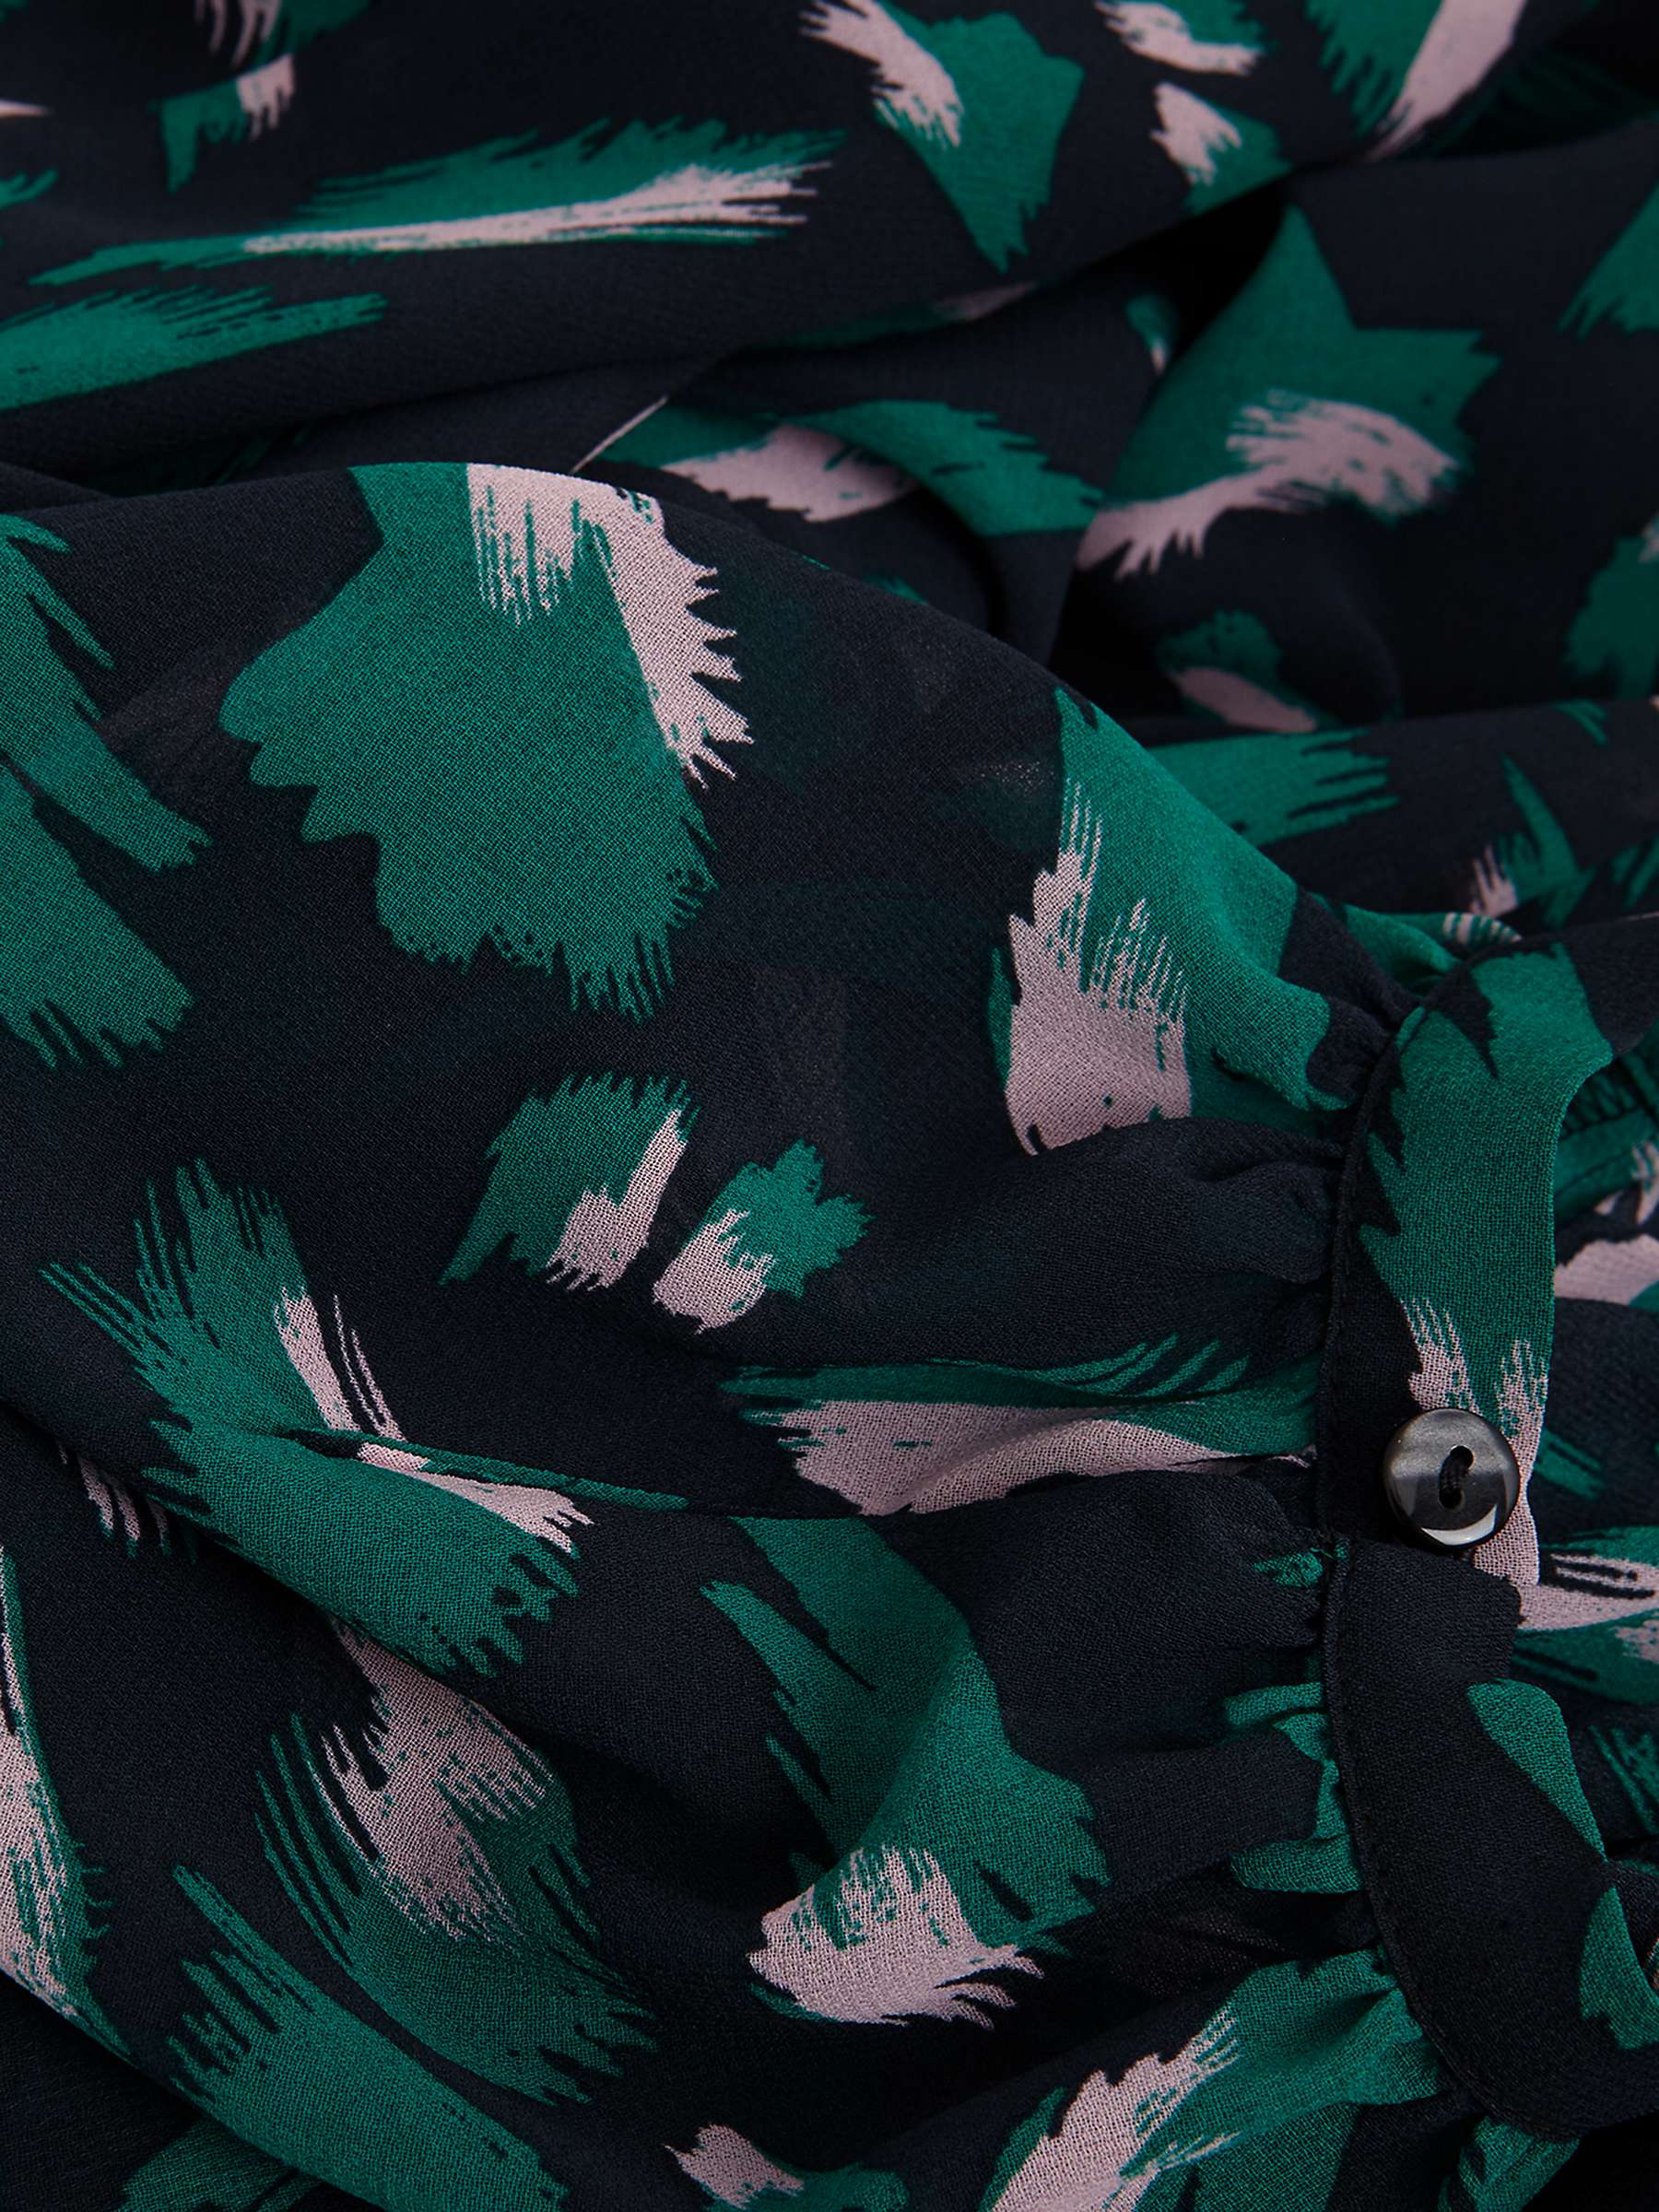 Buy Phase Eight Penele Abstract Print Mini Dress, Green/Multi Online at johnlewis.com